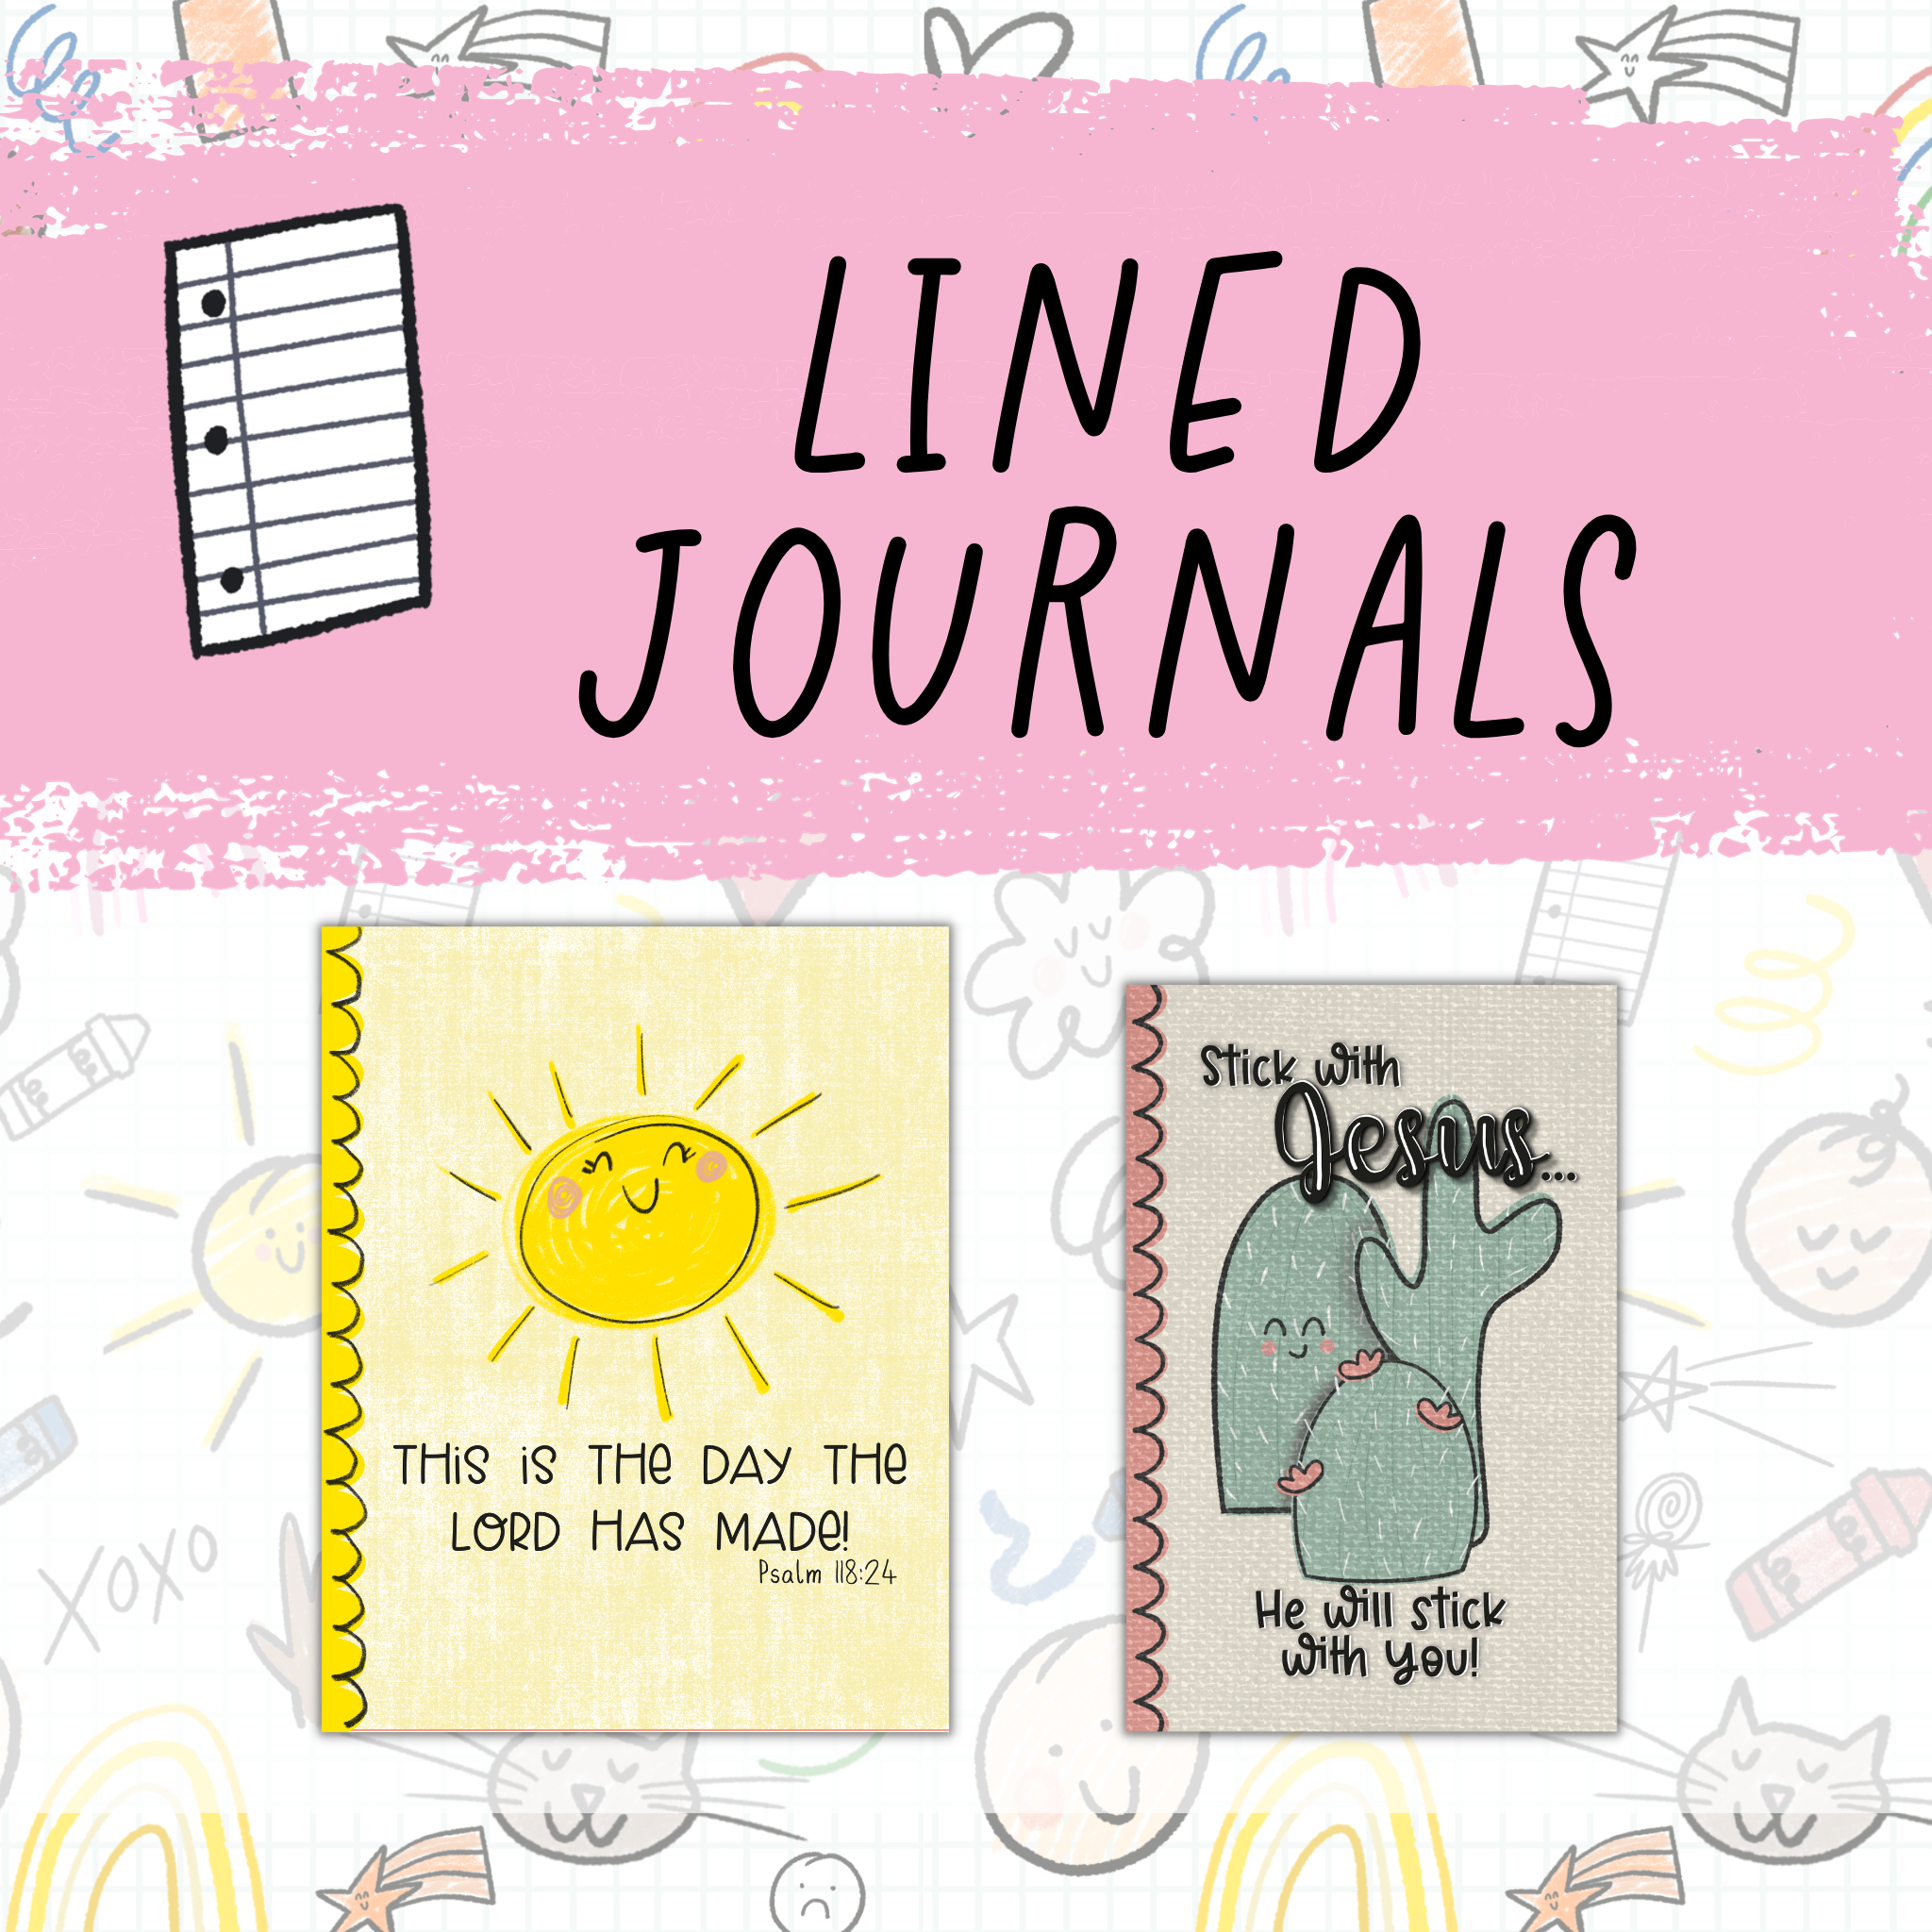 o	Button representing a variety of lined journals created on Kindle Direct Publishing by self published author and illustrator Lindsay Dain.